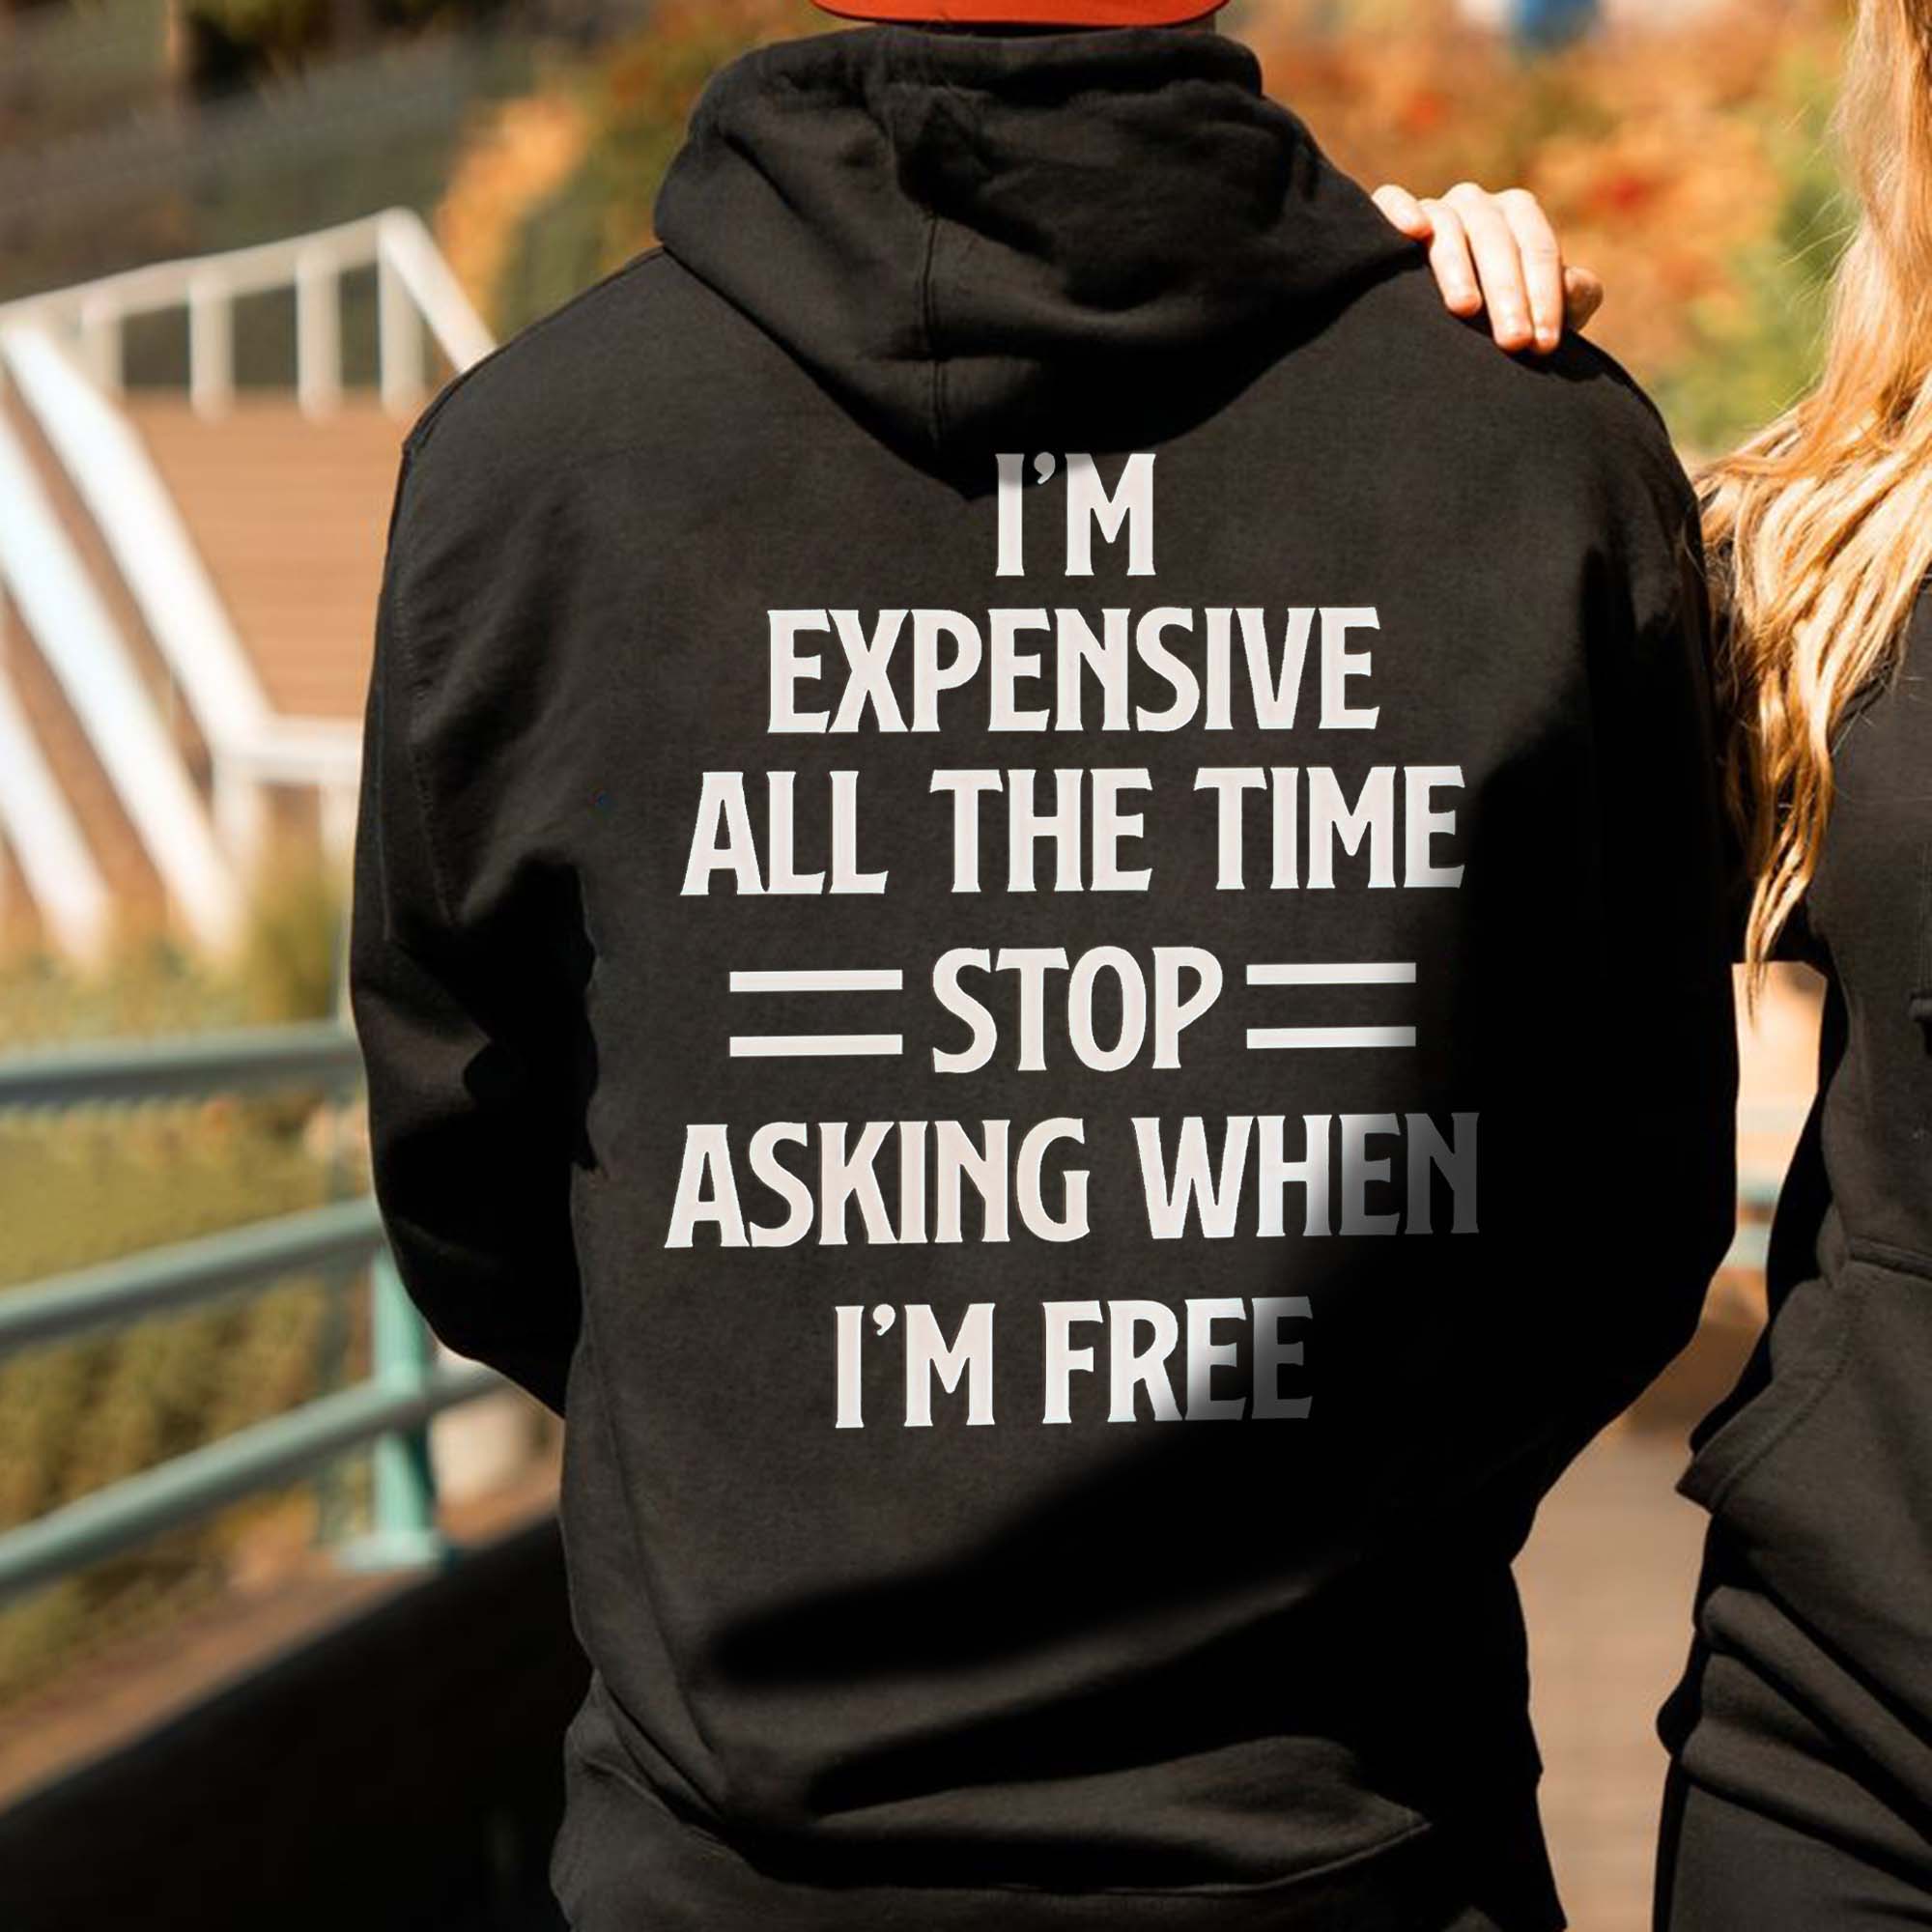 I'm Expensive All The Time Stop= Asking When I'm Free Printed Men's Hoodie